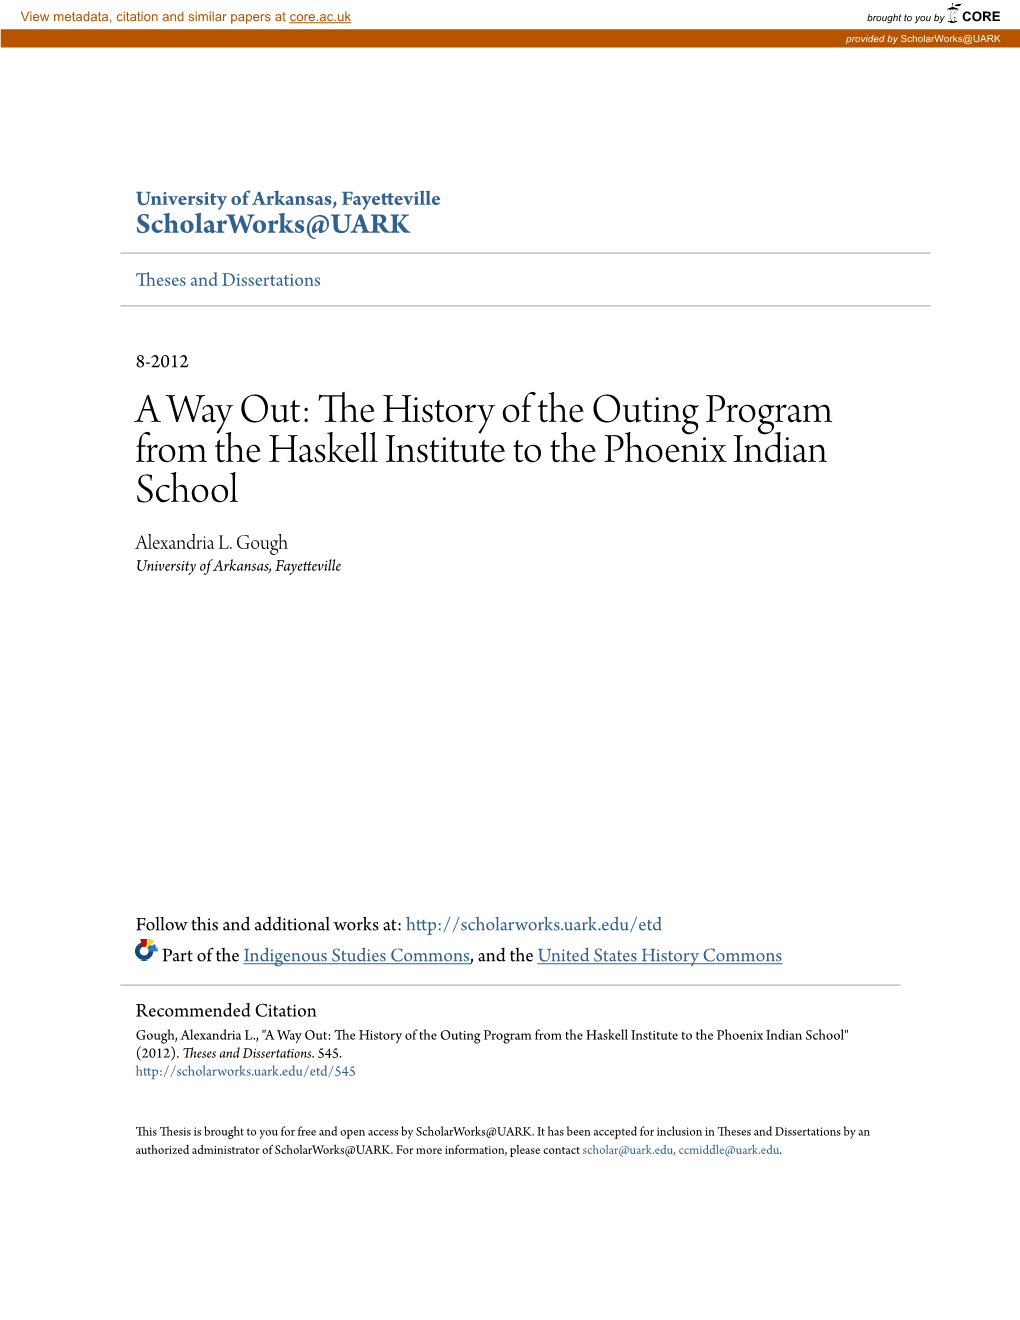 The History of the Outing Program from the Haskell Institute to the Phoenix Indian School